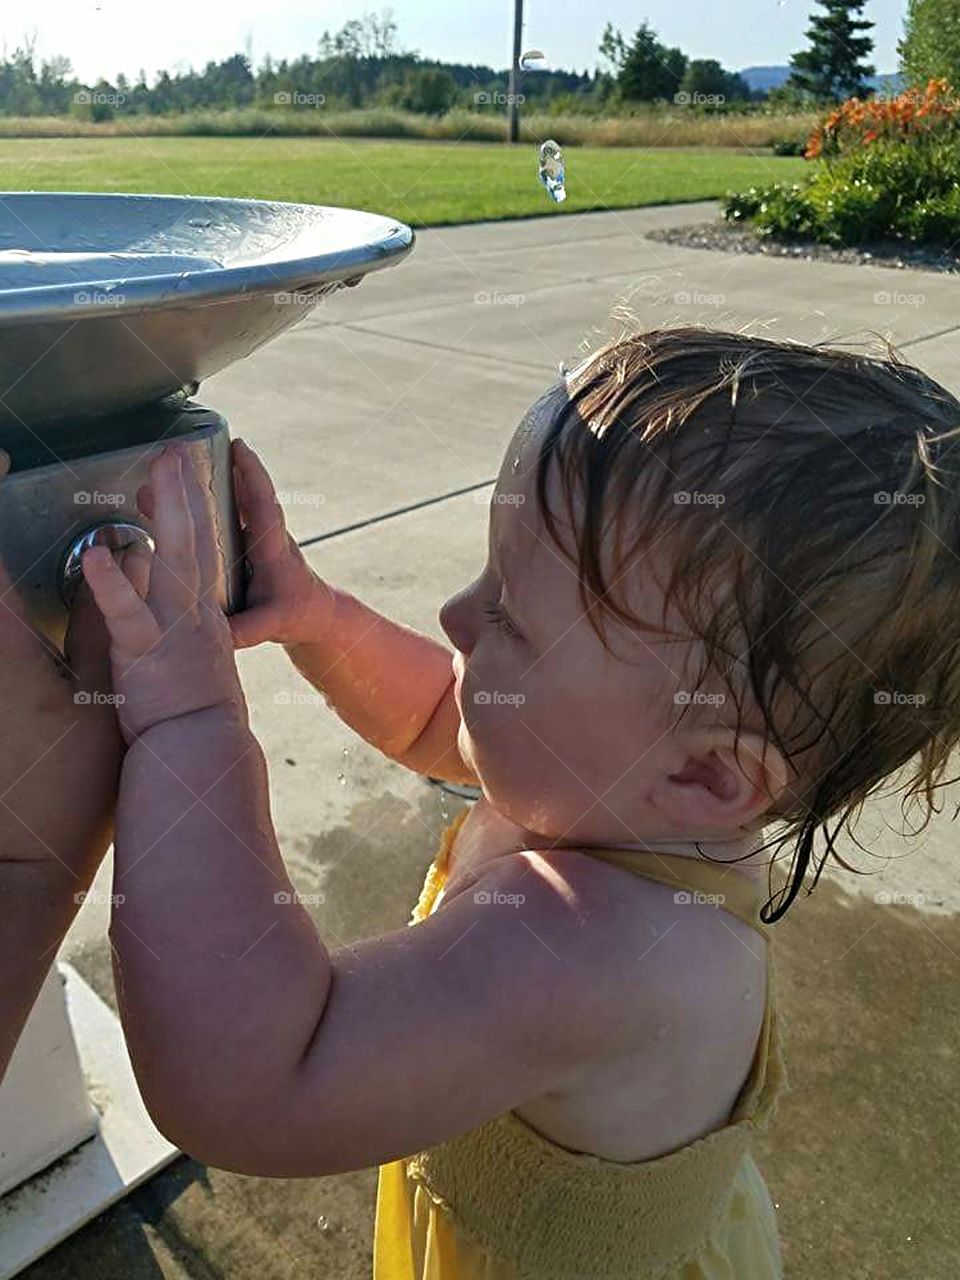 Playing in the drinking fountain